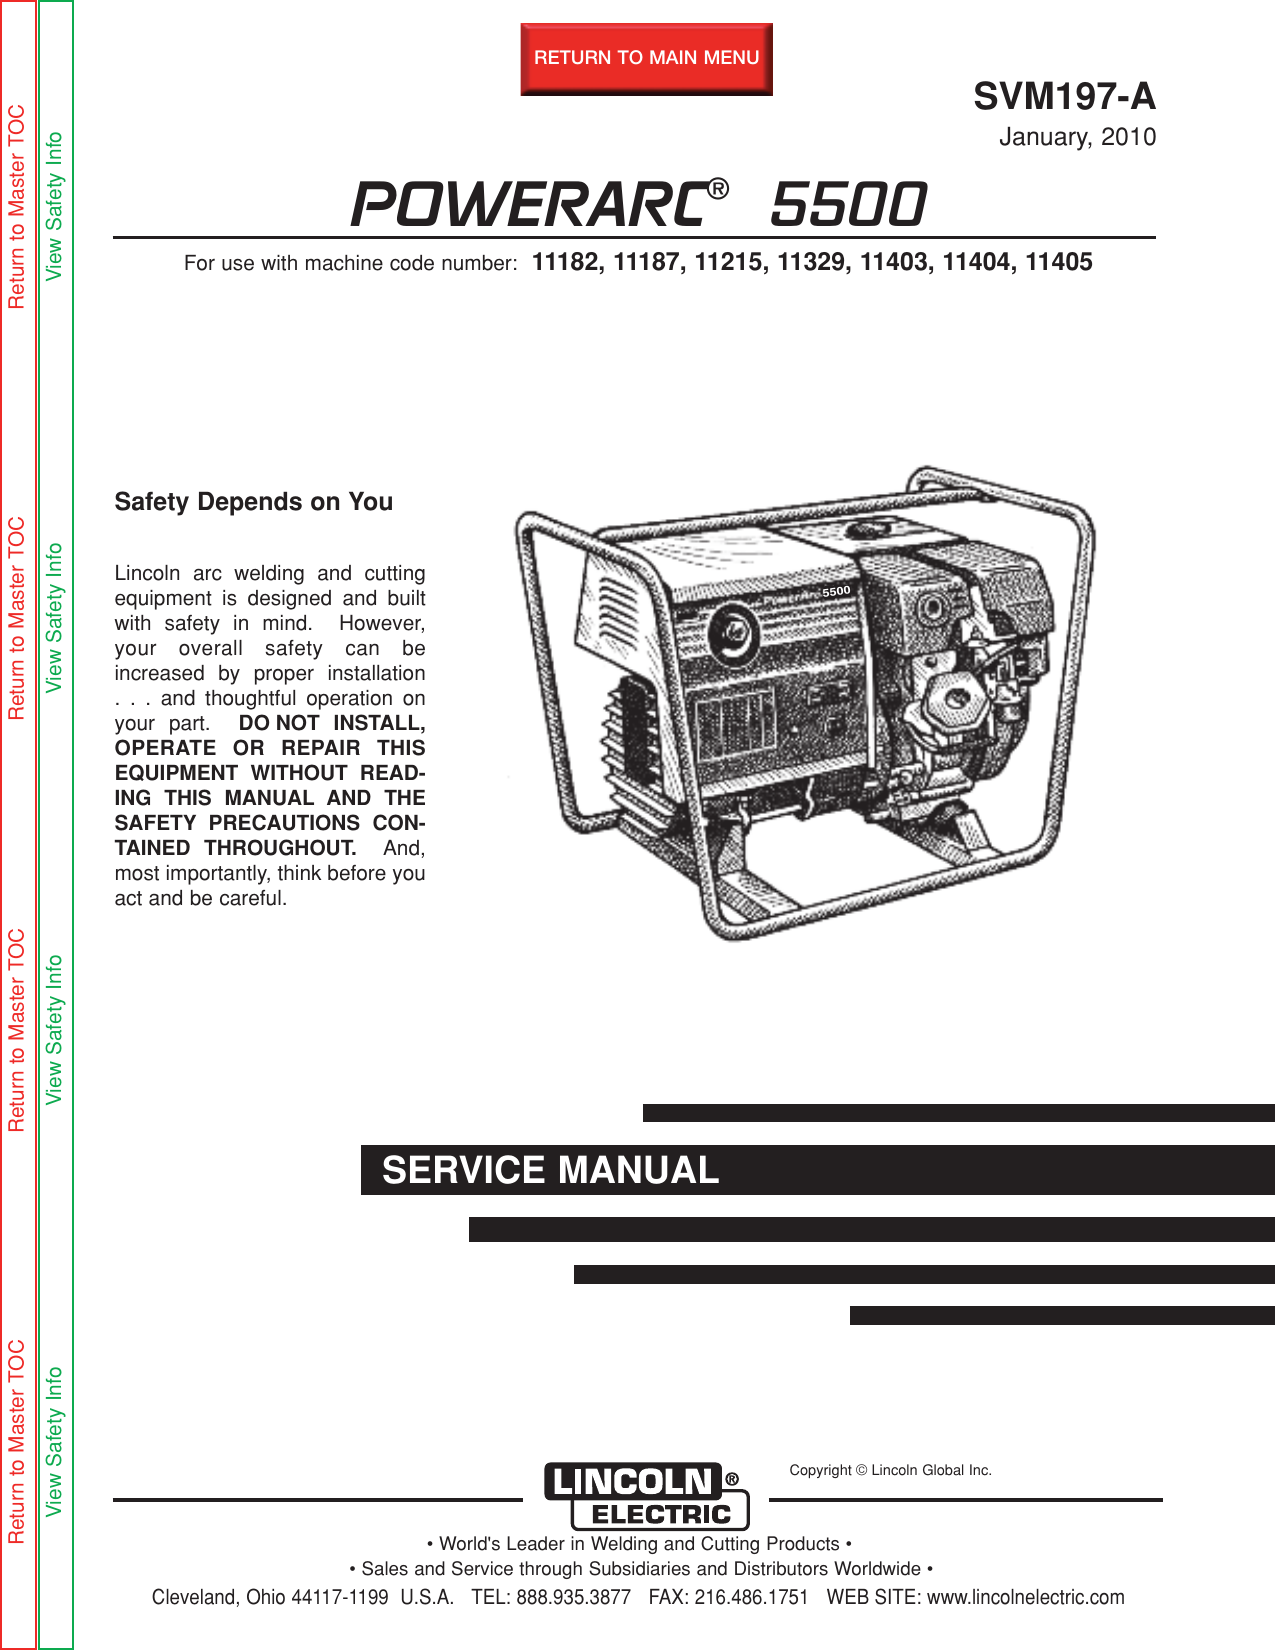 Lincoln Electric Powerarc 5500 Svm197 A Users Manual